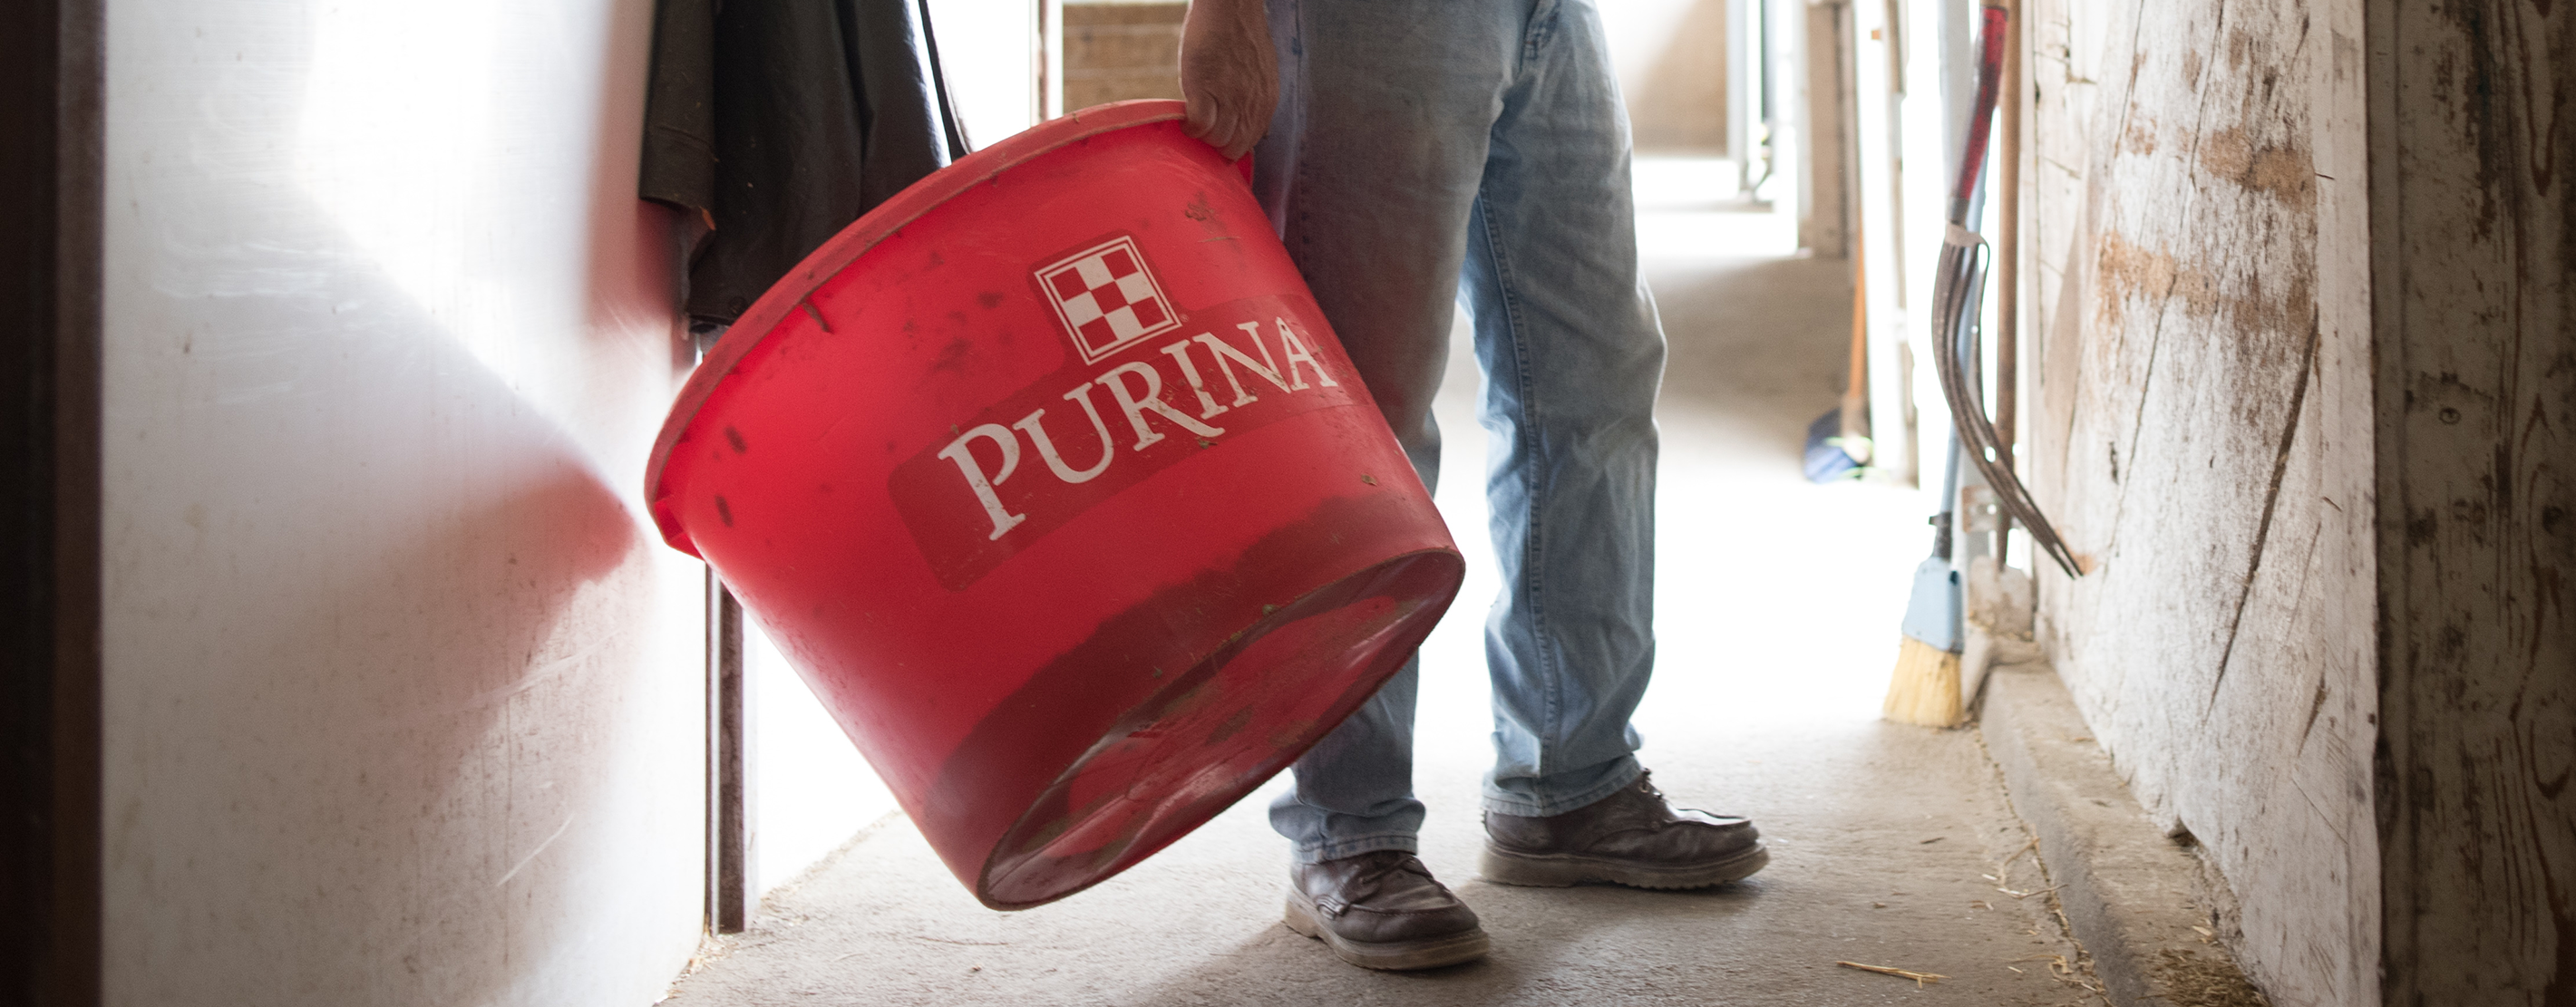 Person holding a red Purina feed tub